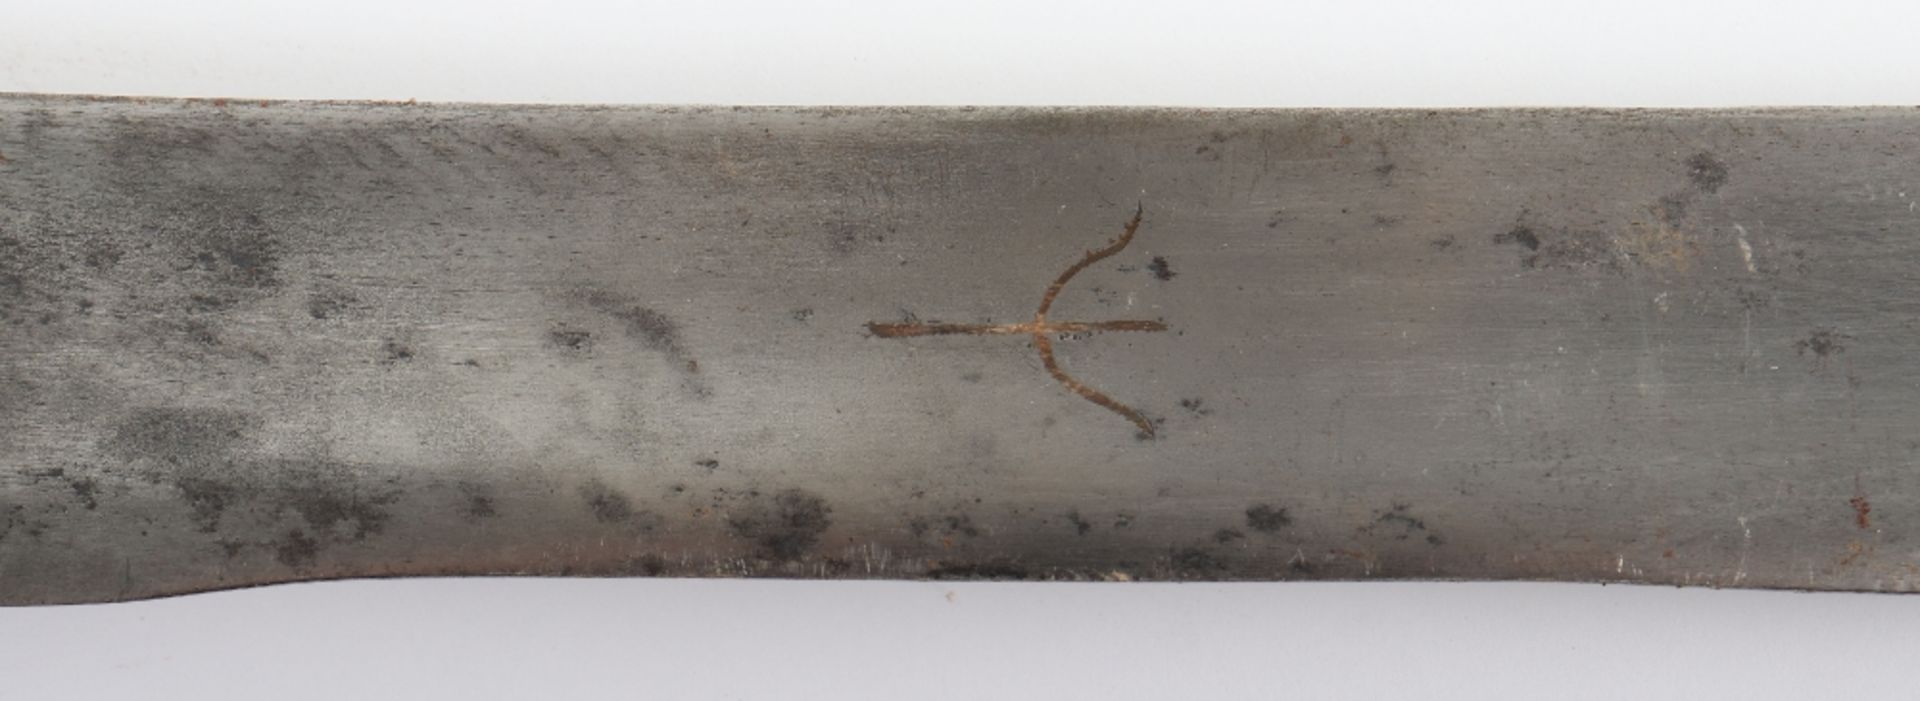 Decorative Indian Sword Tulwar Perhaps for a Youth - Image 7 of 13